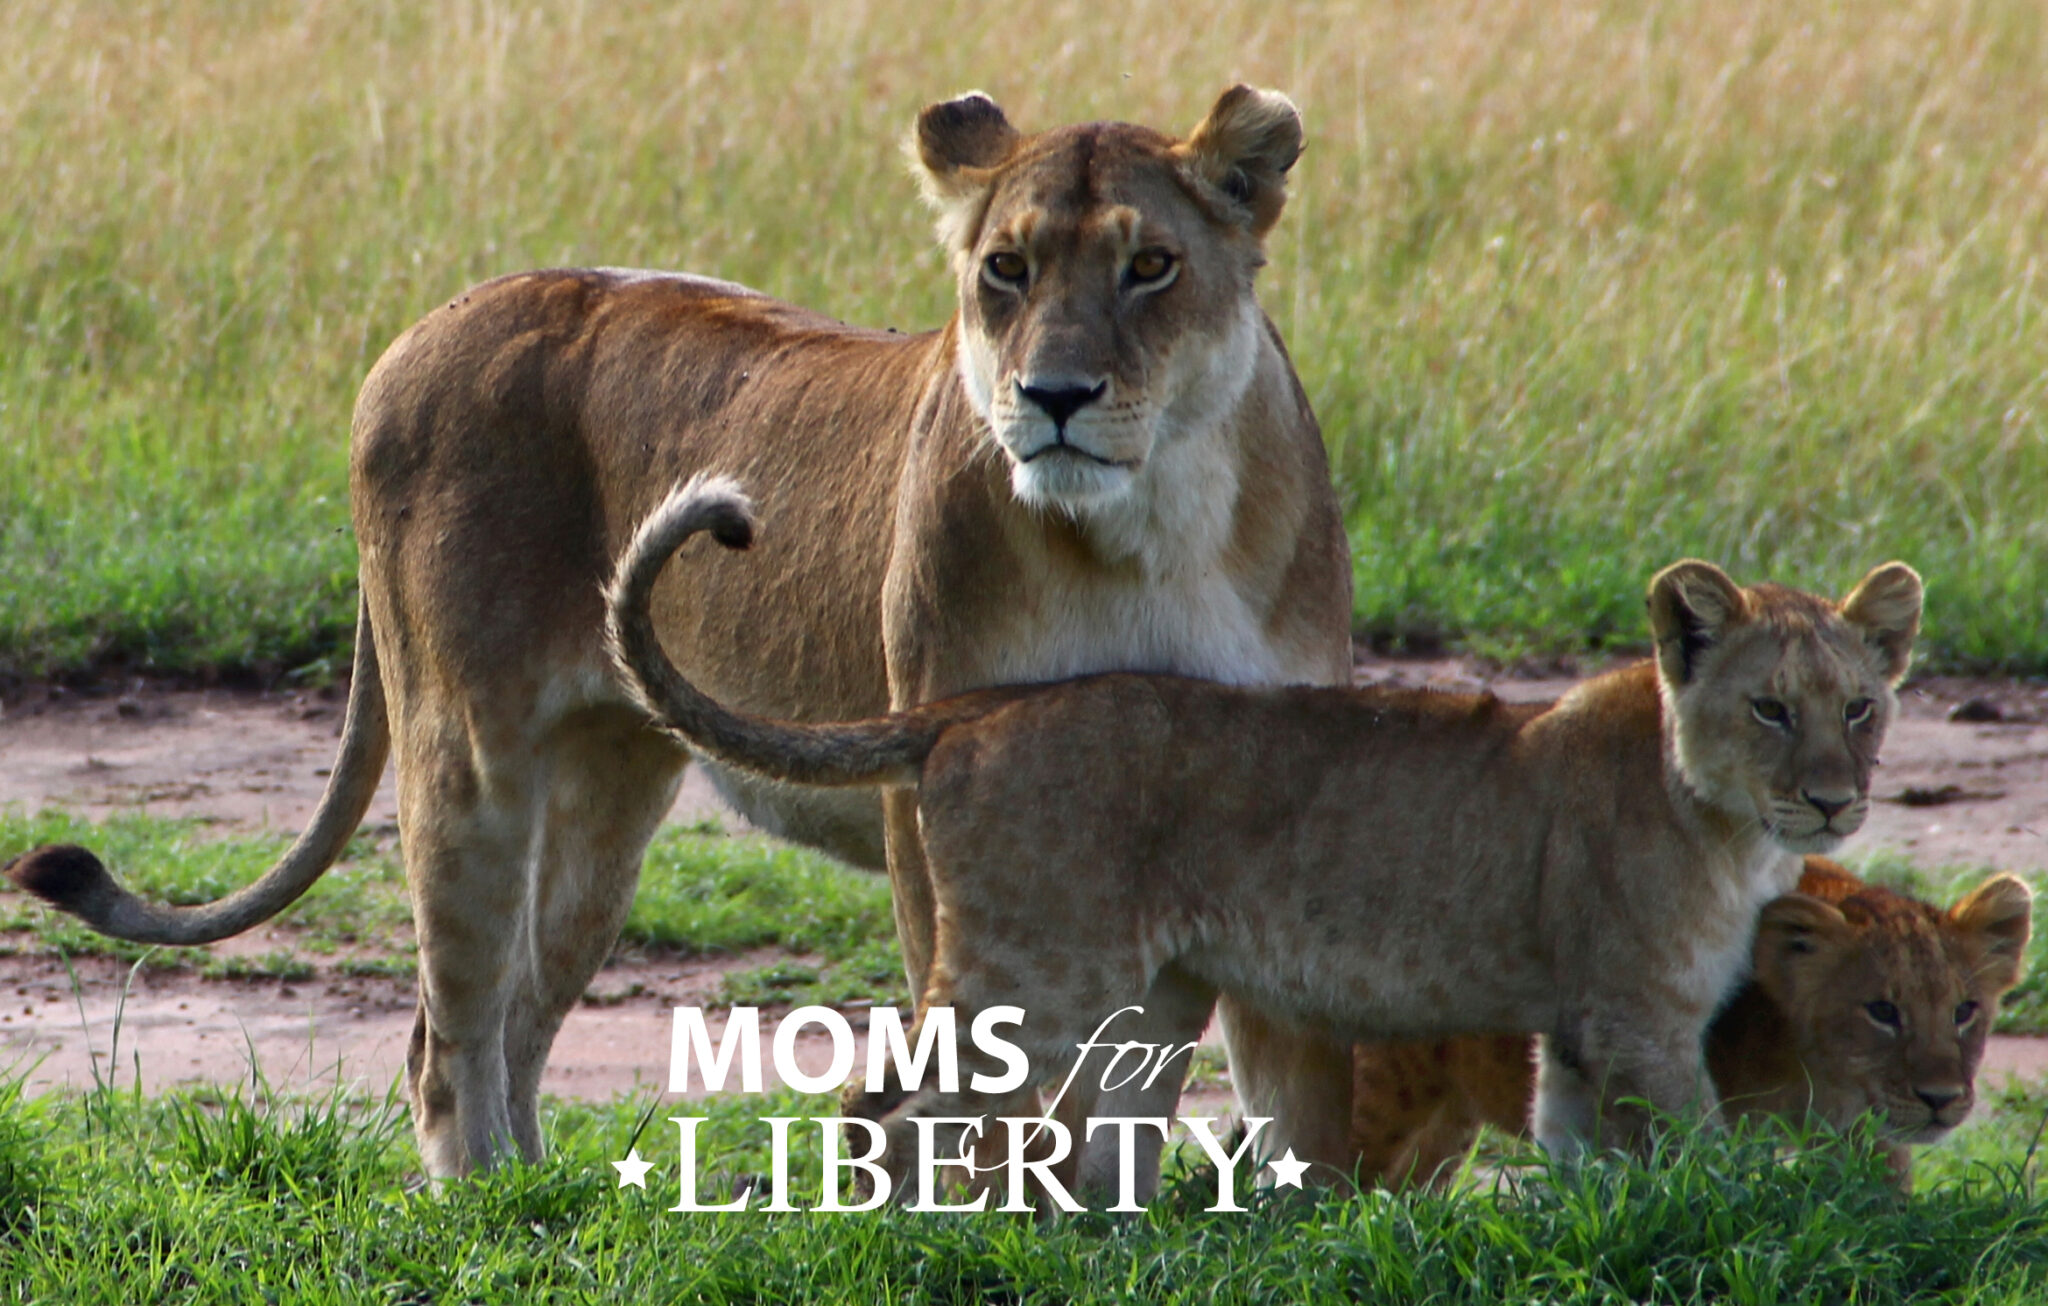 Lionesses - Moms for Liberty